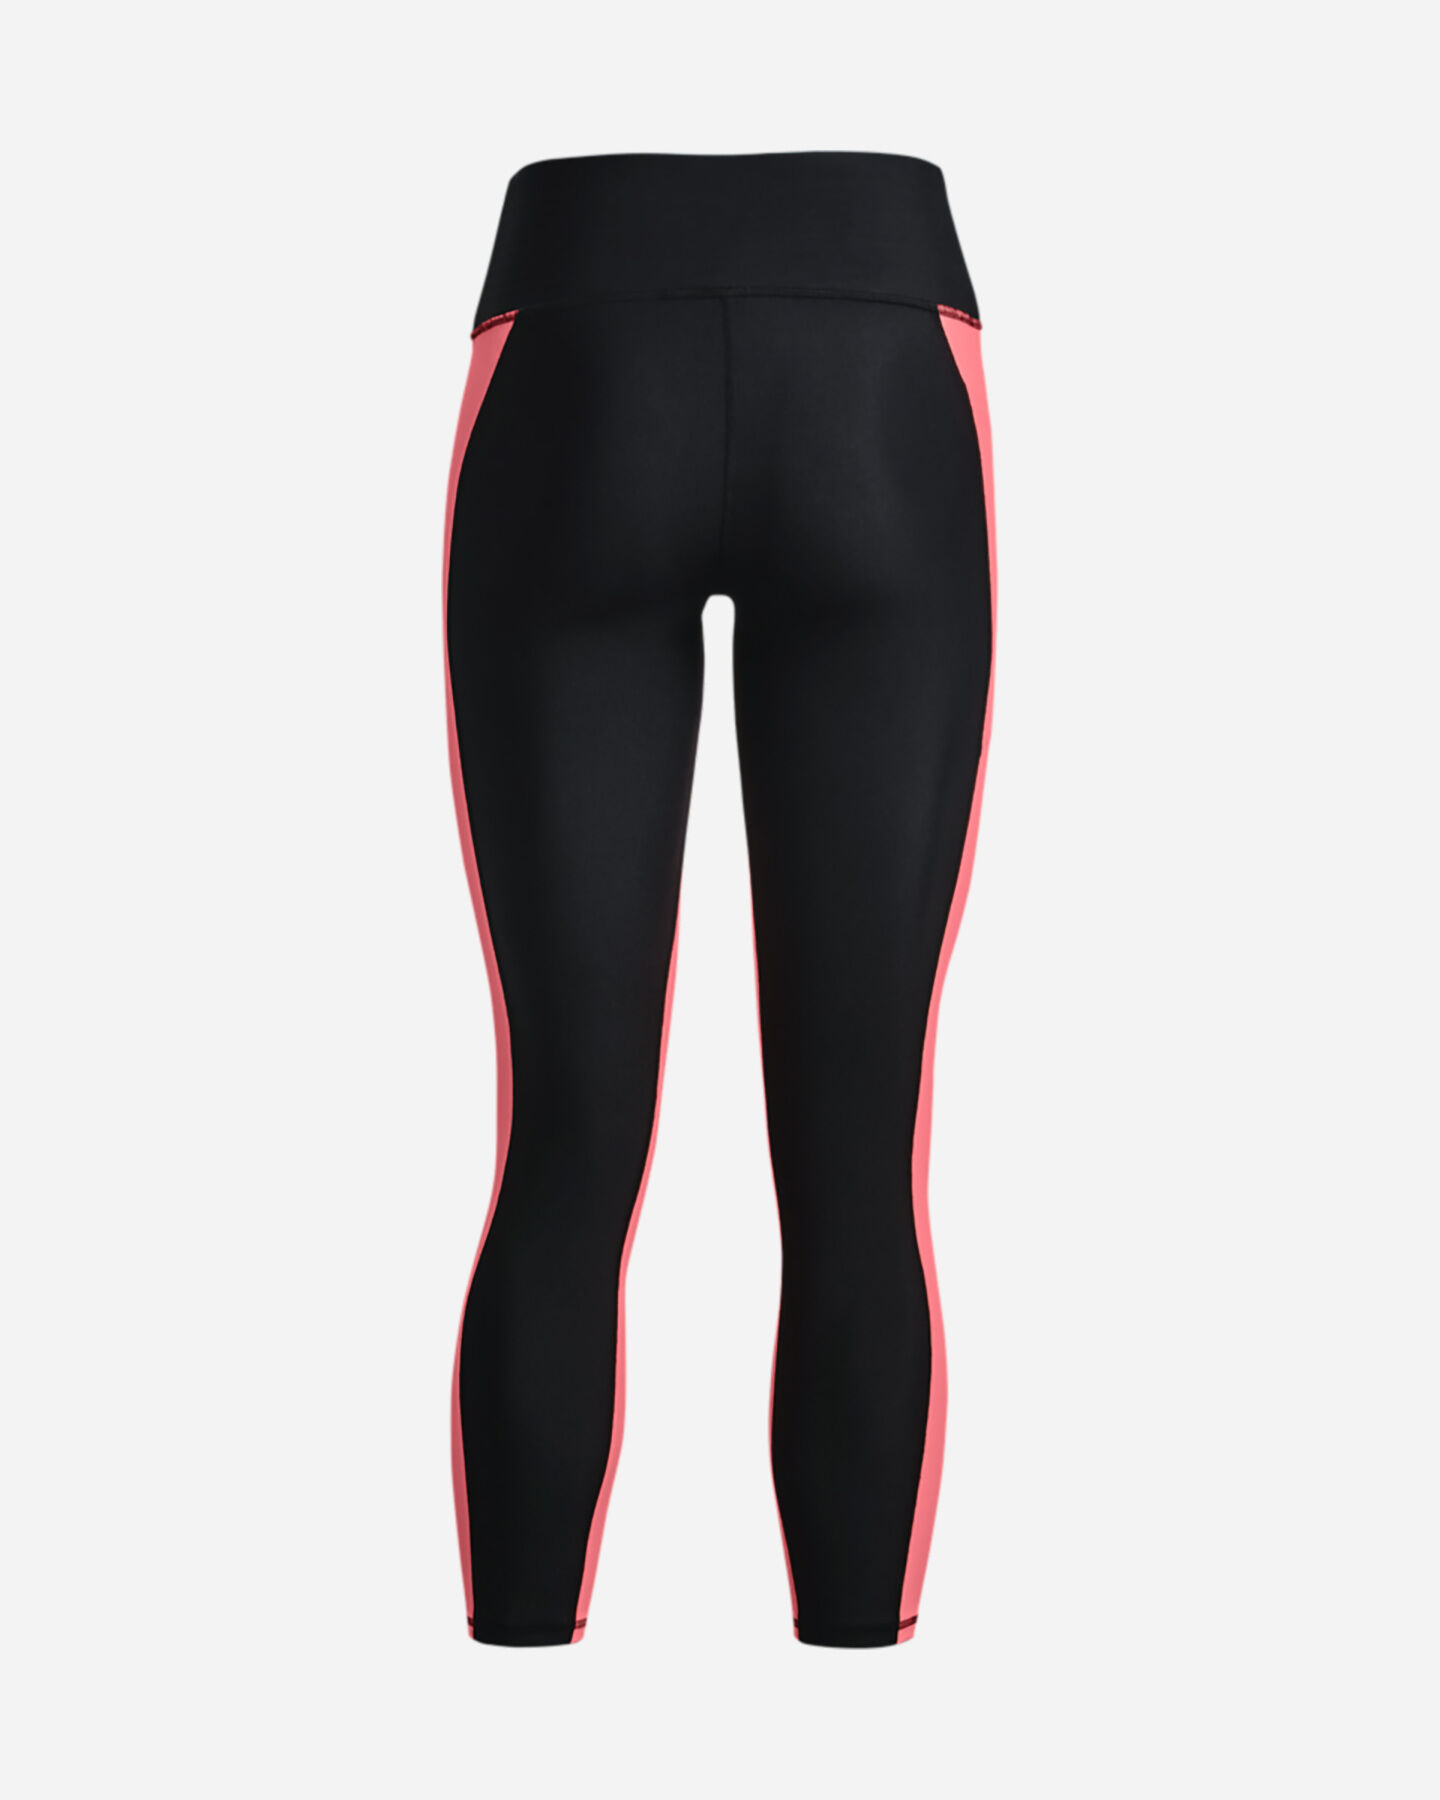  Leggings UNDER ARMOUR LATERAL INSERT 7/8 W S5336860|0001|XS scatto 1